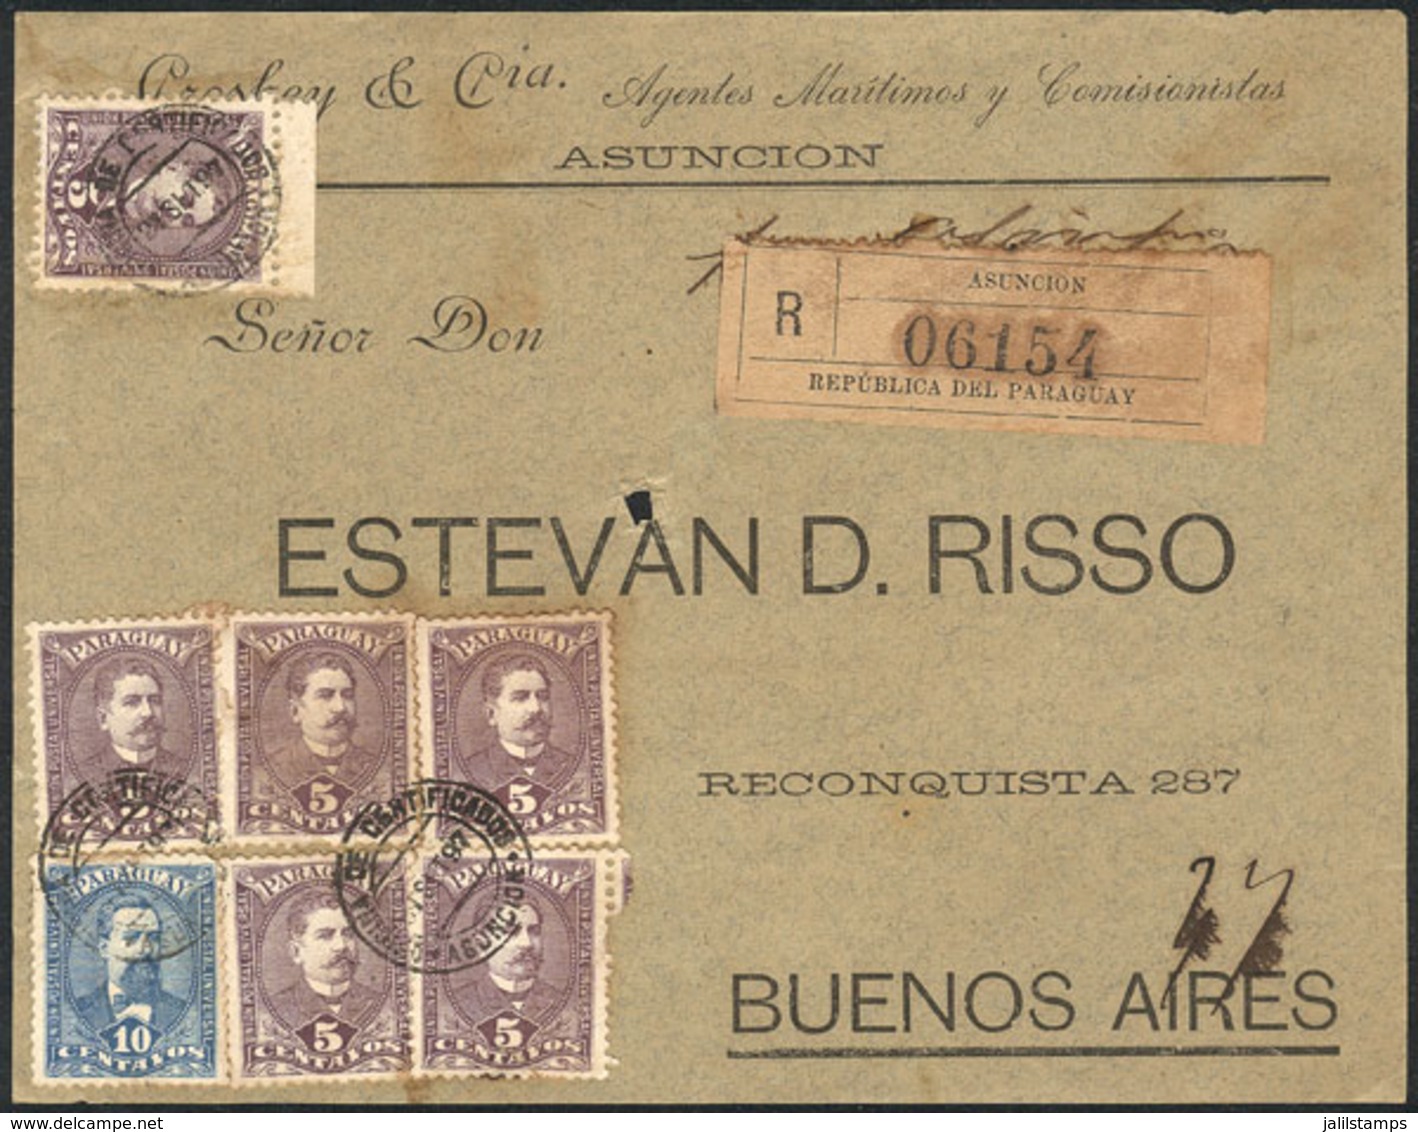 PARAGUAY: Front Of A Registered Cover Franked With 40c., Sent From Asunción To Buenos Aires On 21/SE/1897, Very Nice! - Paraguay